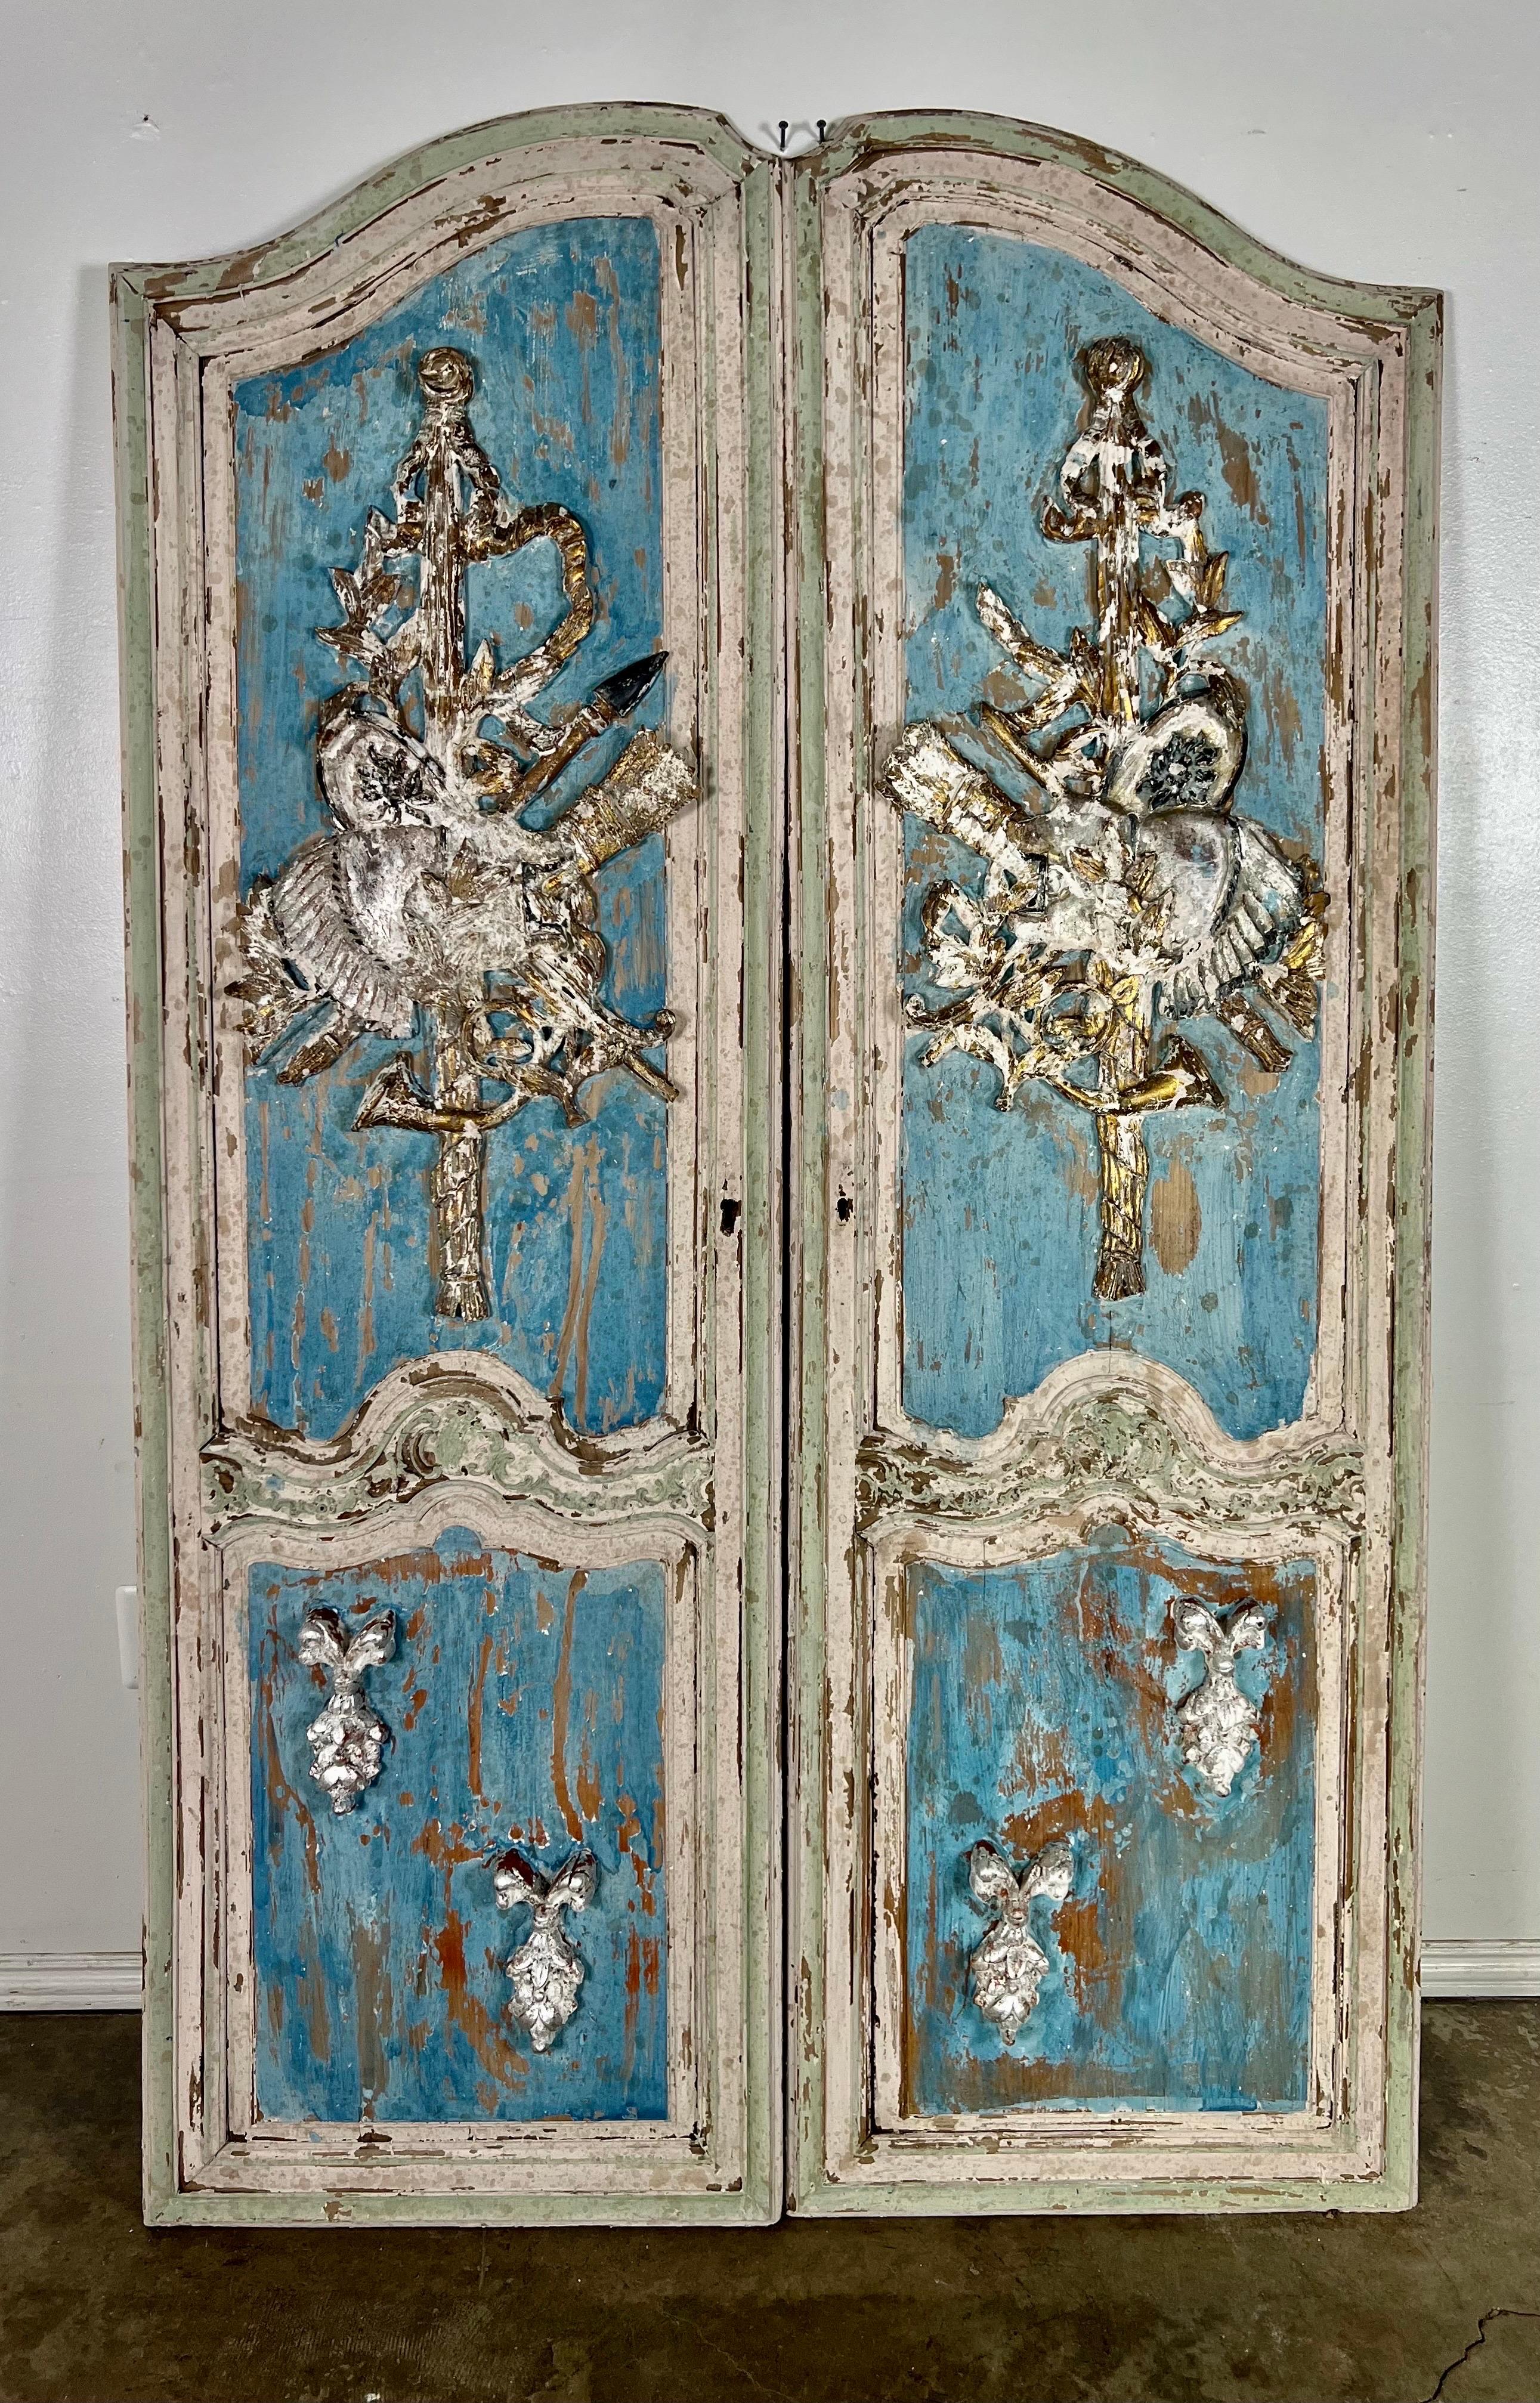 Pair of hand painted antique French doors.  They have beautiful appliqued carvings of musical instruments surrounded by flowers and bows.  They are painted a French blue with accents of white and the natural wood underneath.  The doors are 25